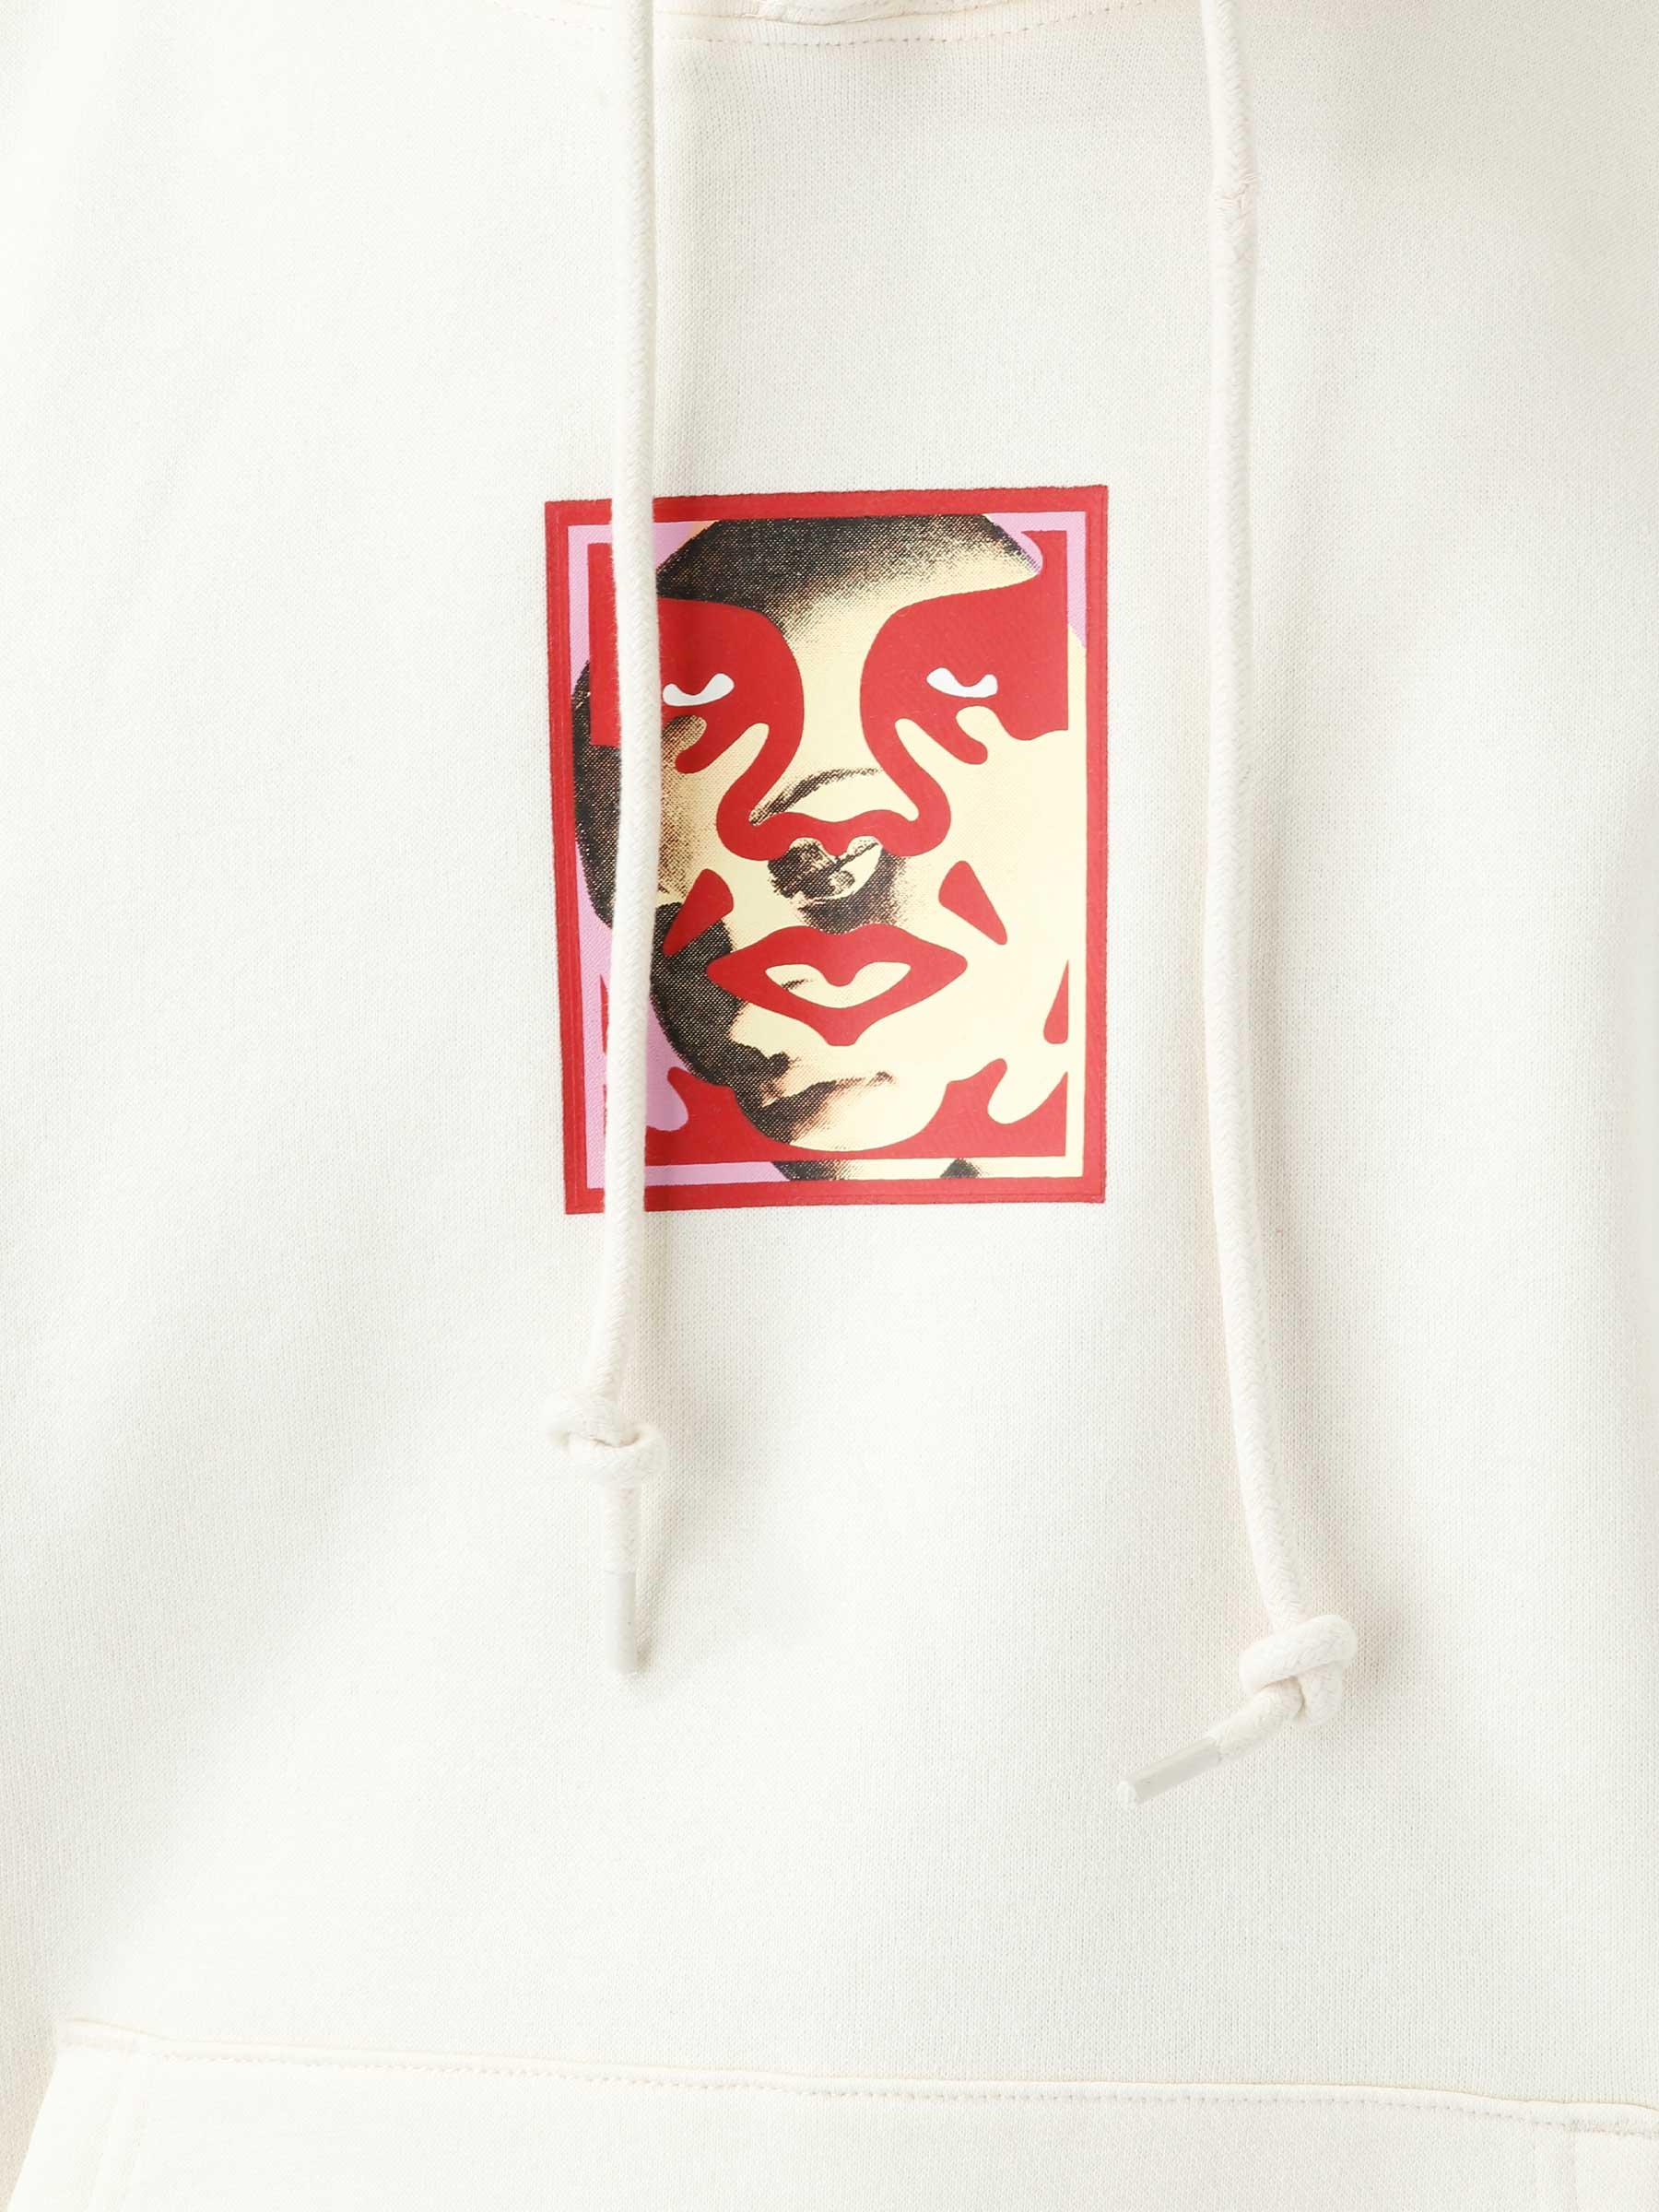 Obey Double Face Hoodie Unbleached 112843150